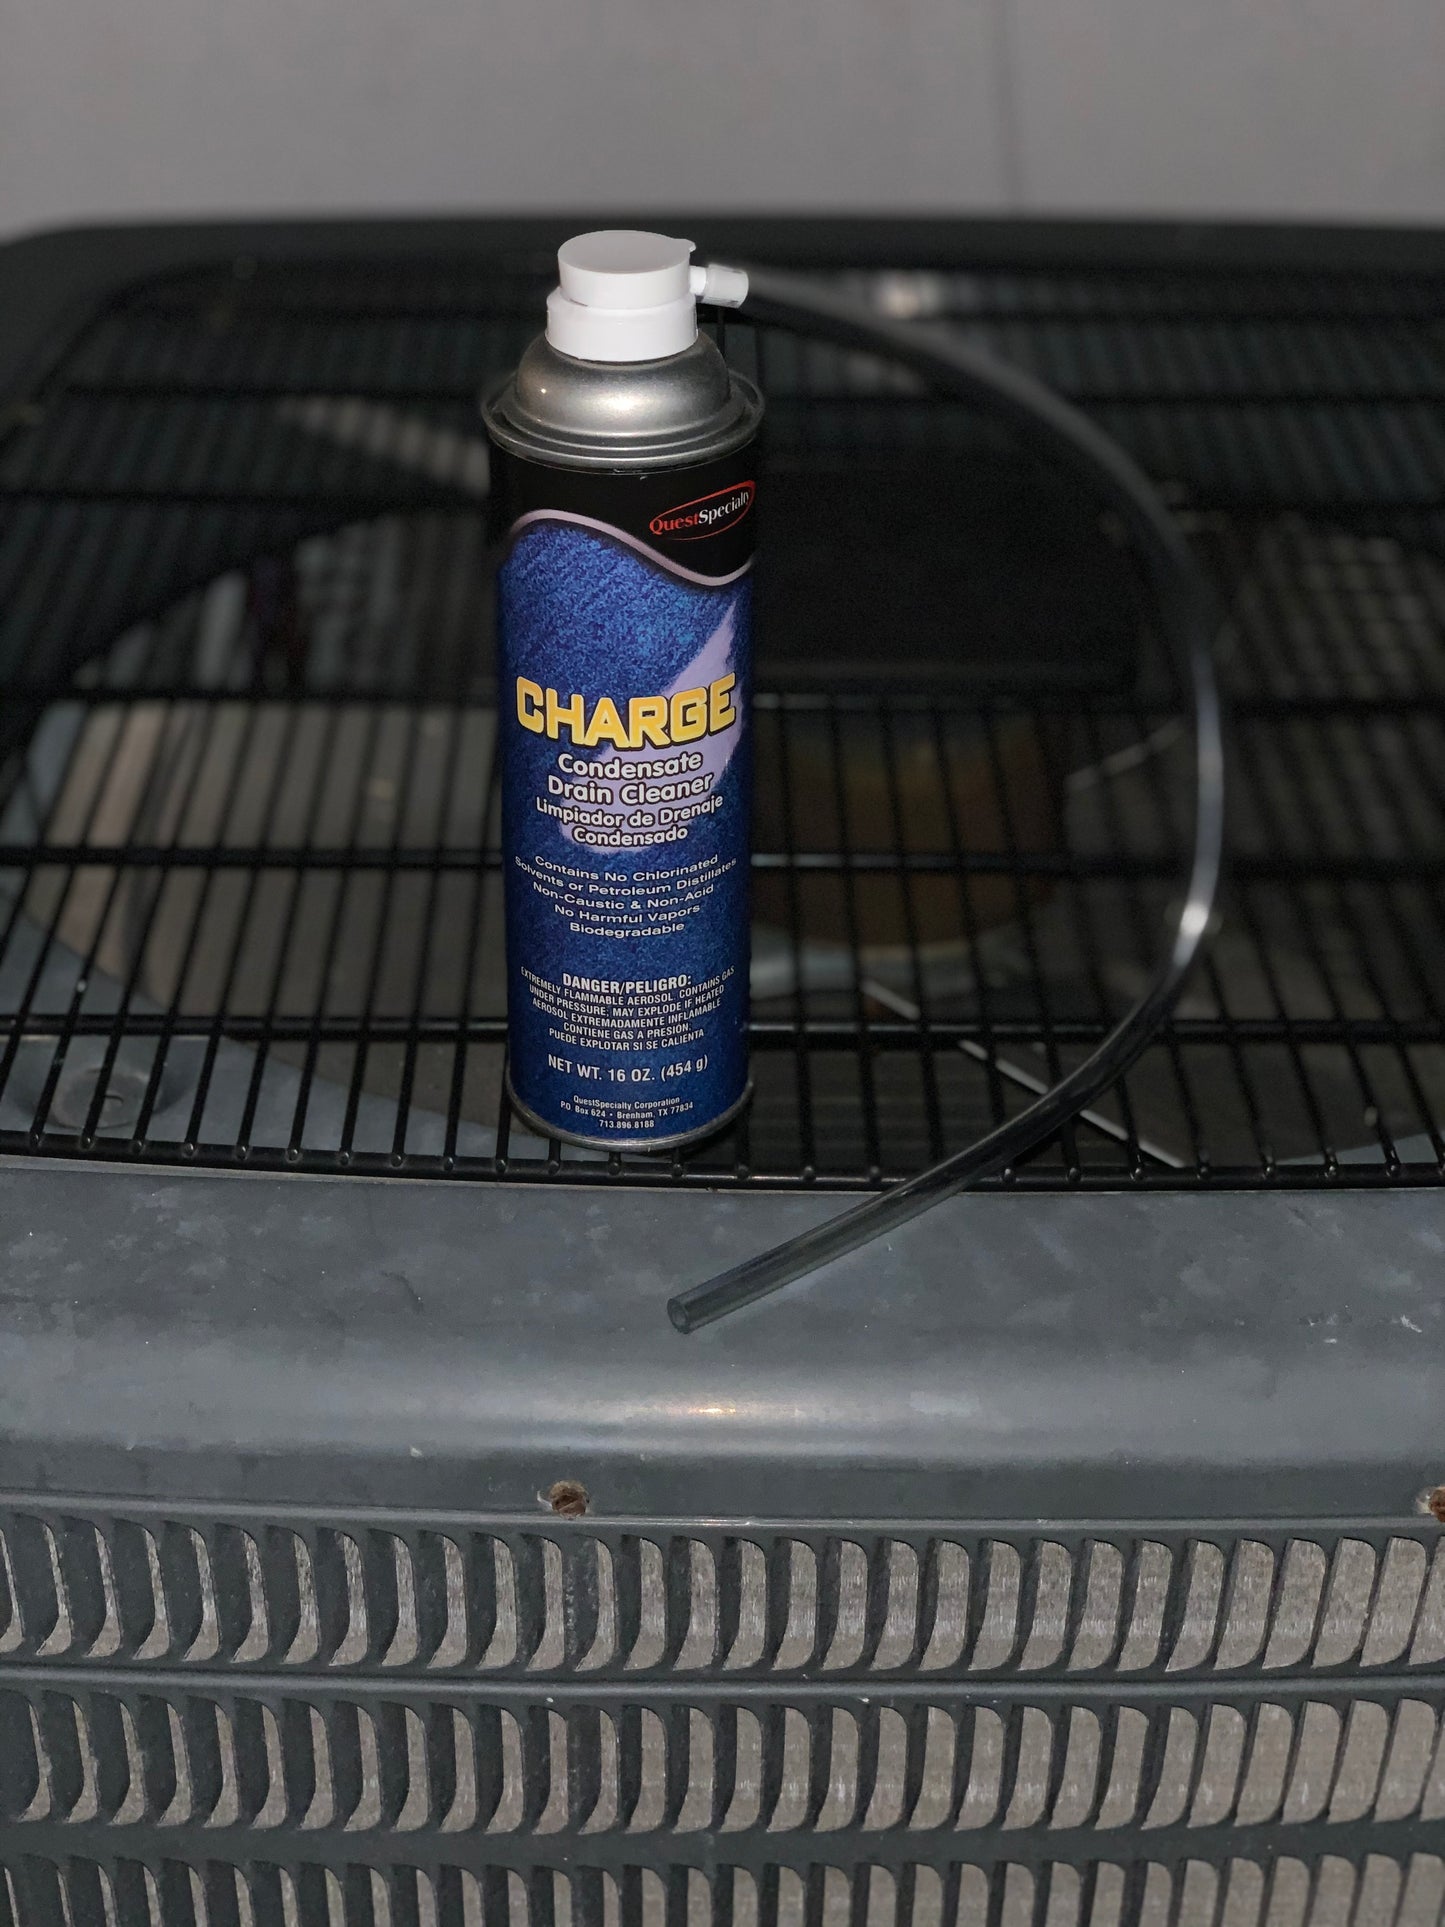 CHARGE (100% NATURAL POWERFUL DRAIN OPENER AND A/C DRAIN LINE CLEANER AND MAINTAINER)